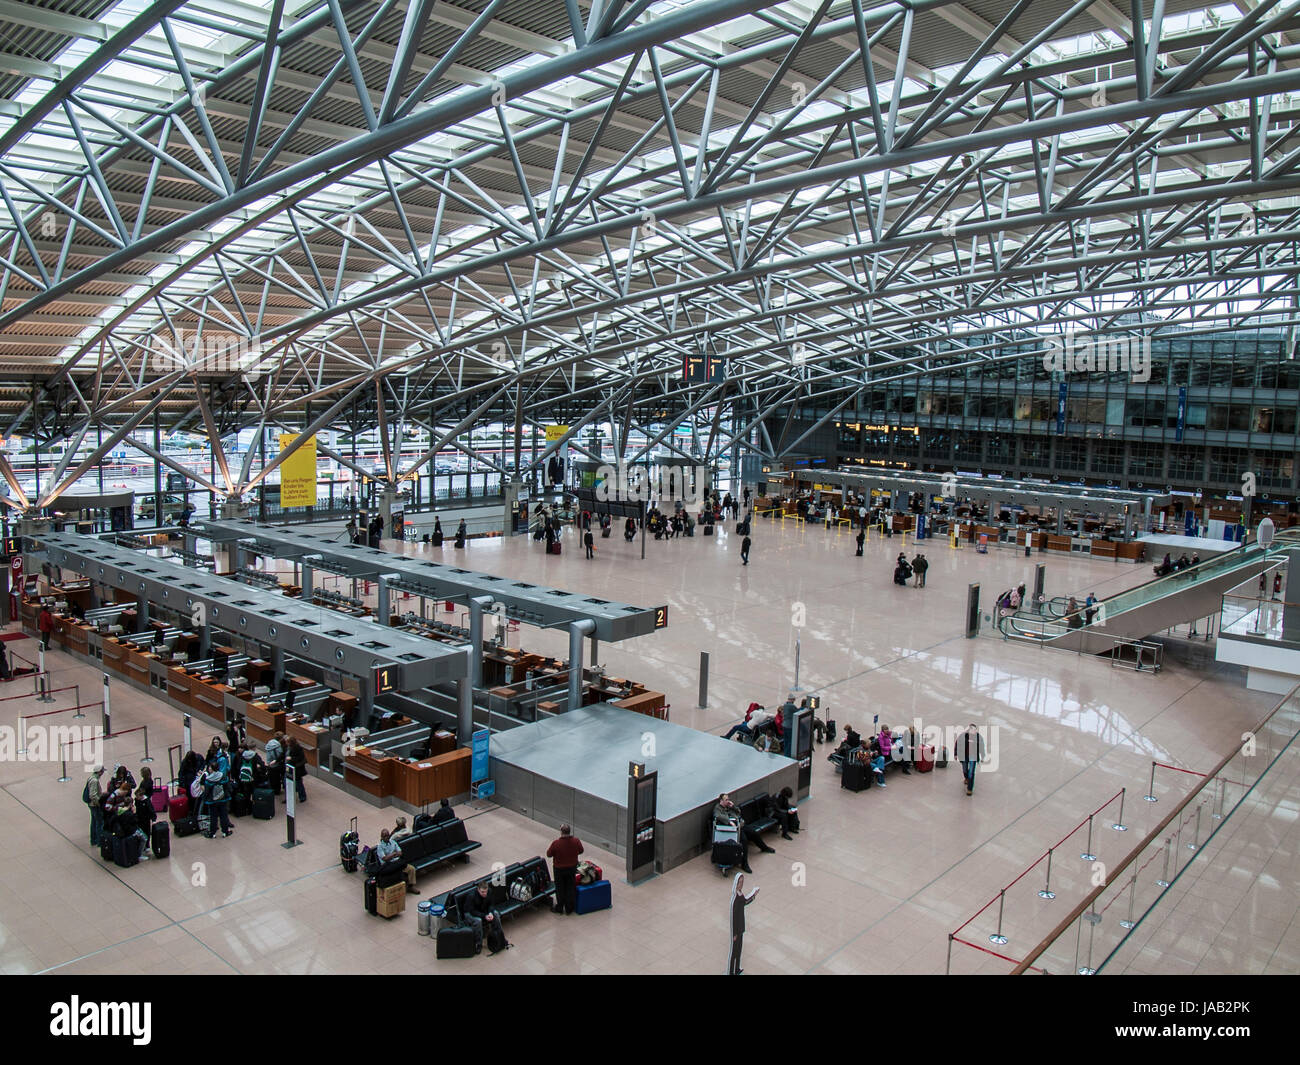 Departure terminal of the airport in Hamburg-Fuhlsbuettel, Germany., Stock Photo